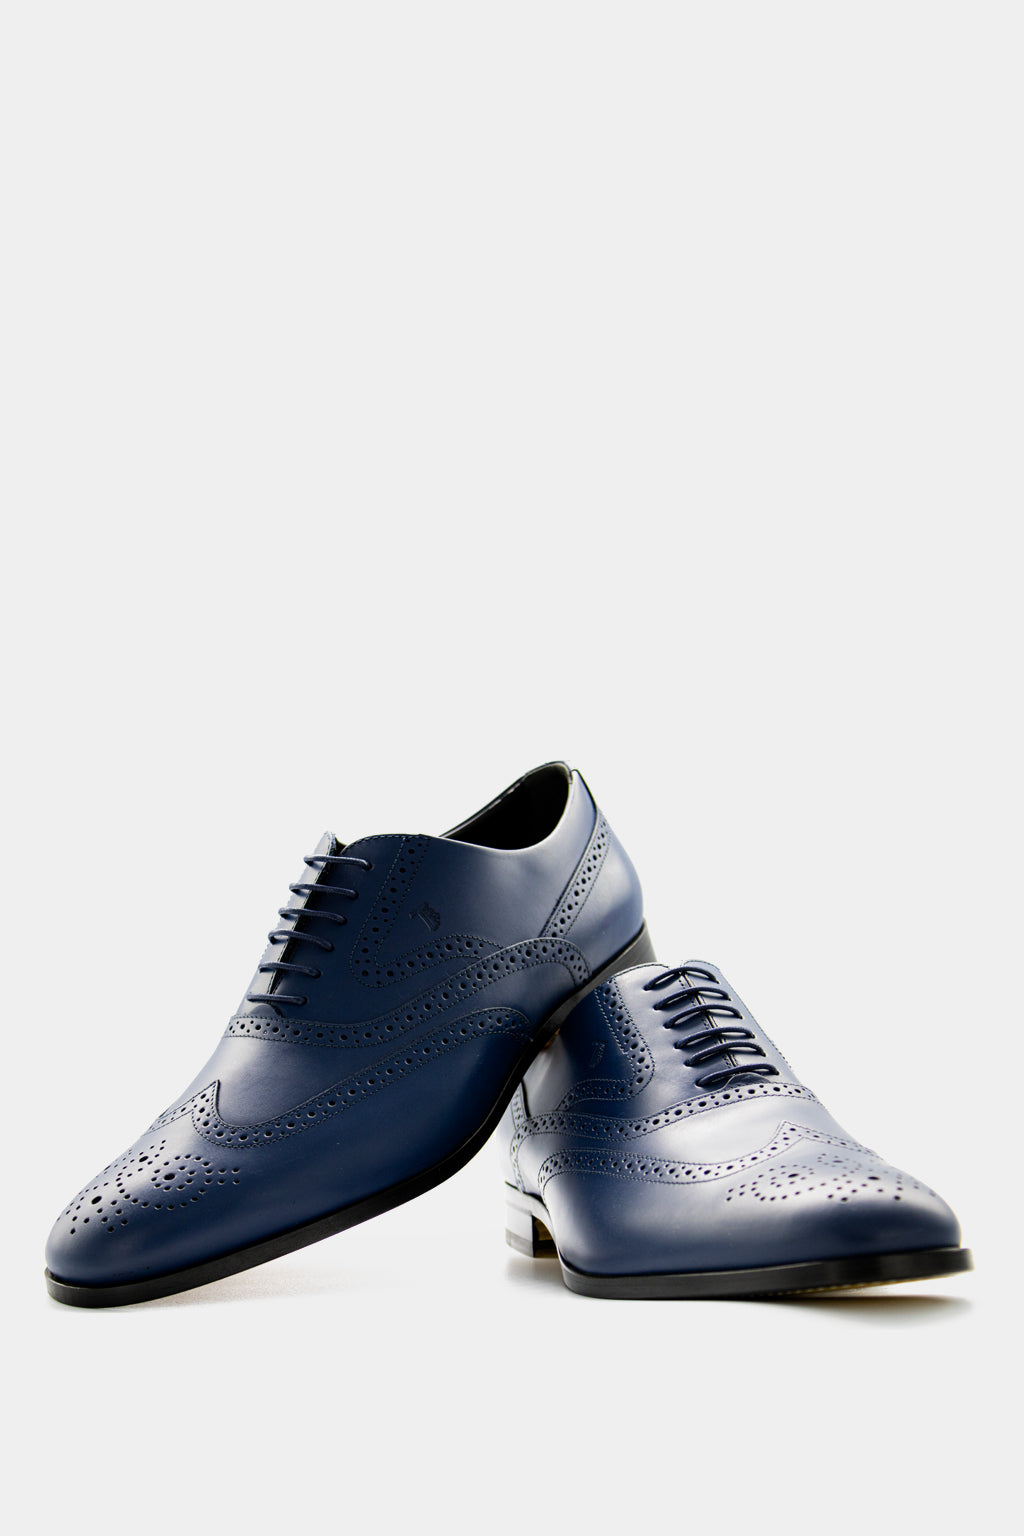 Tod's - Men's Perforated Leather Lace-Up Oxford Shoes